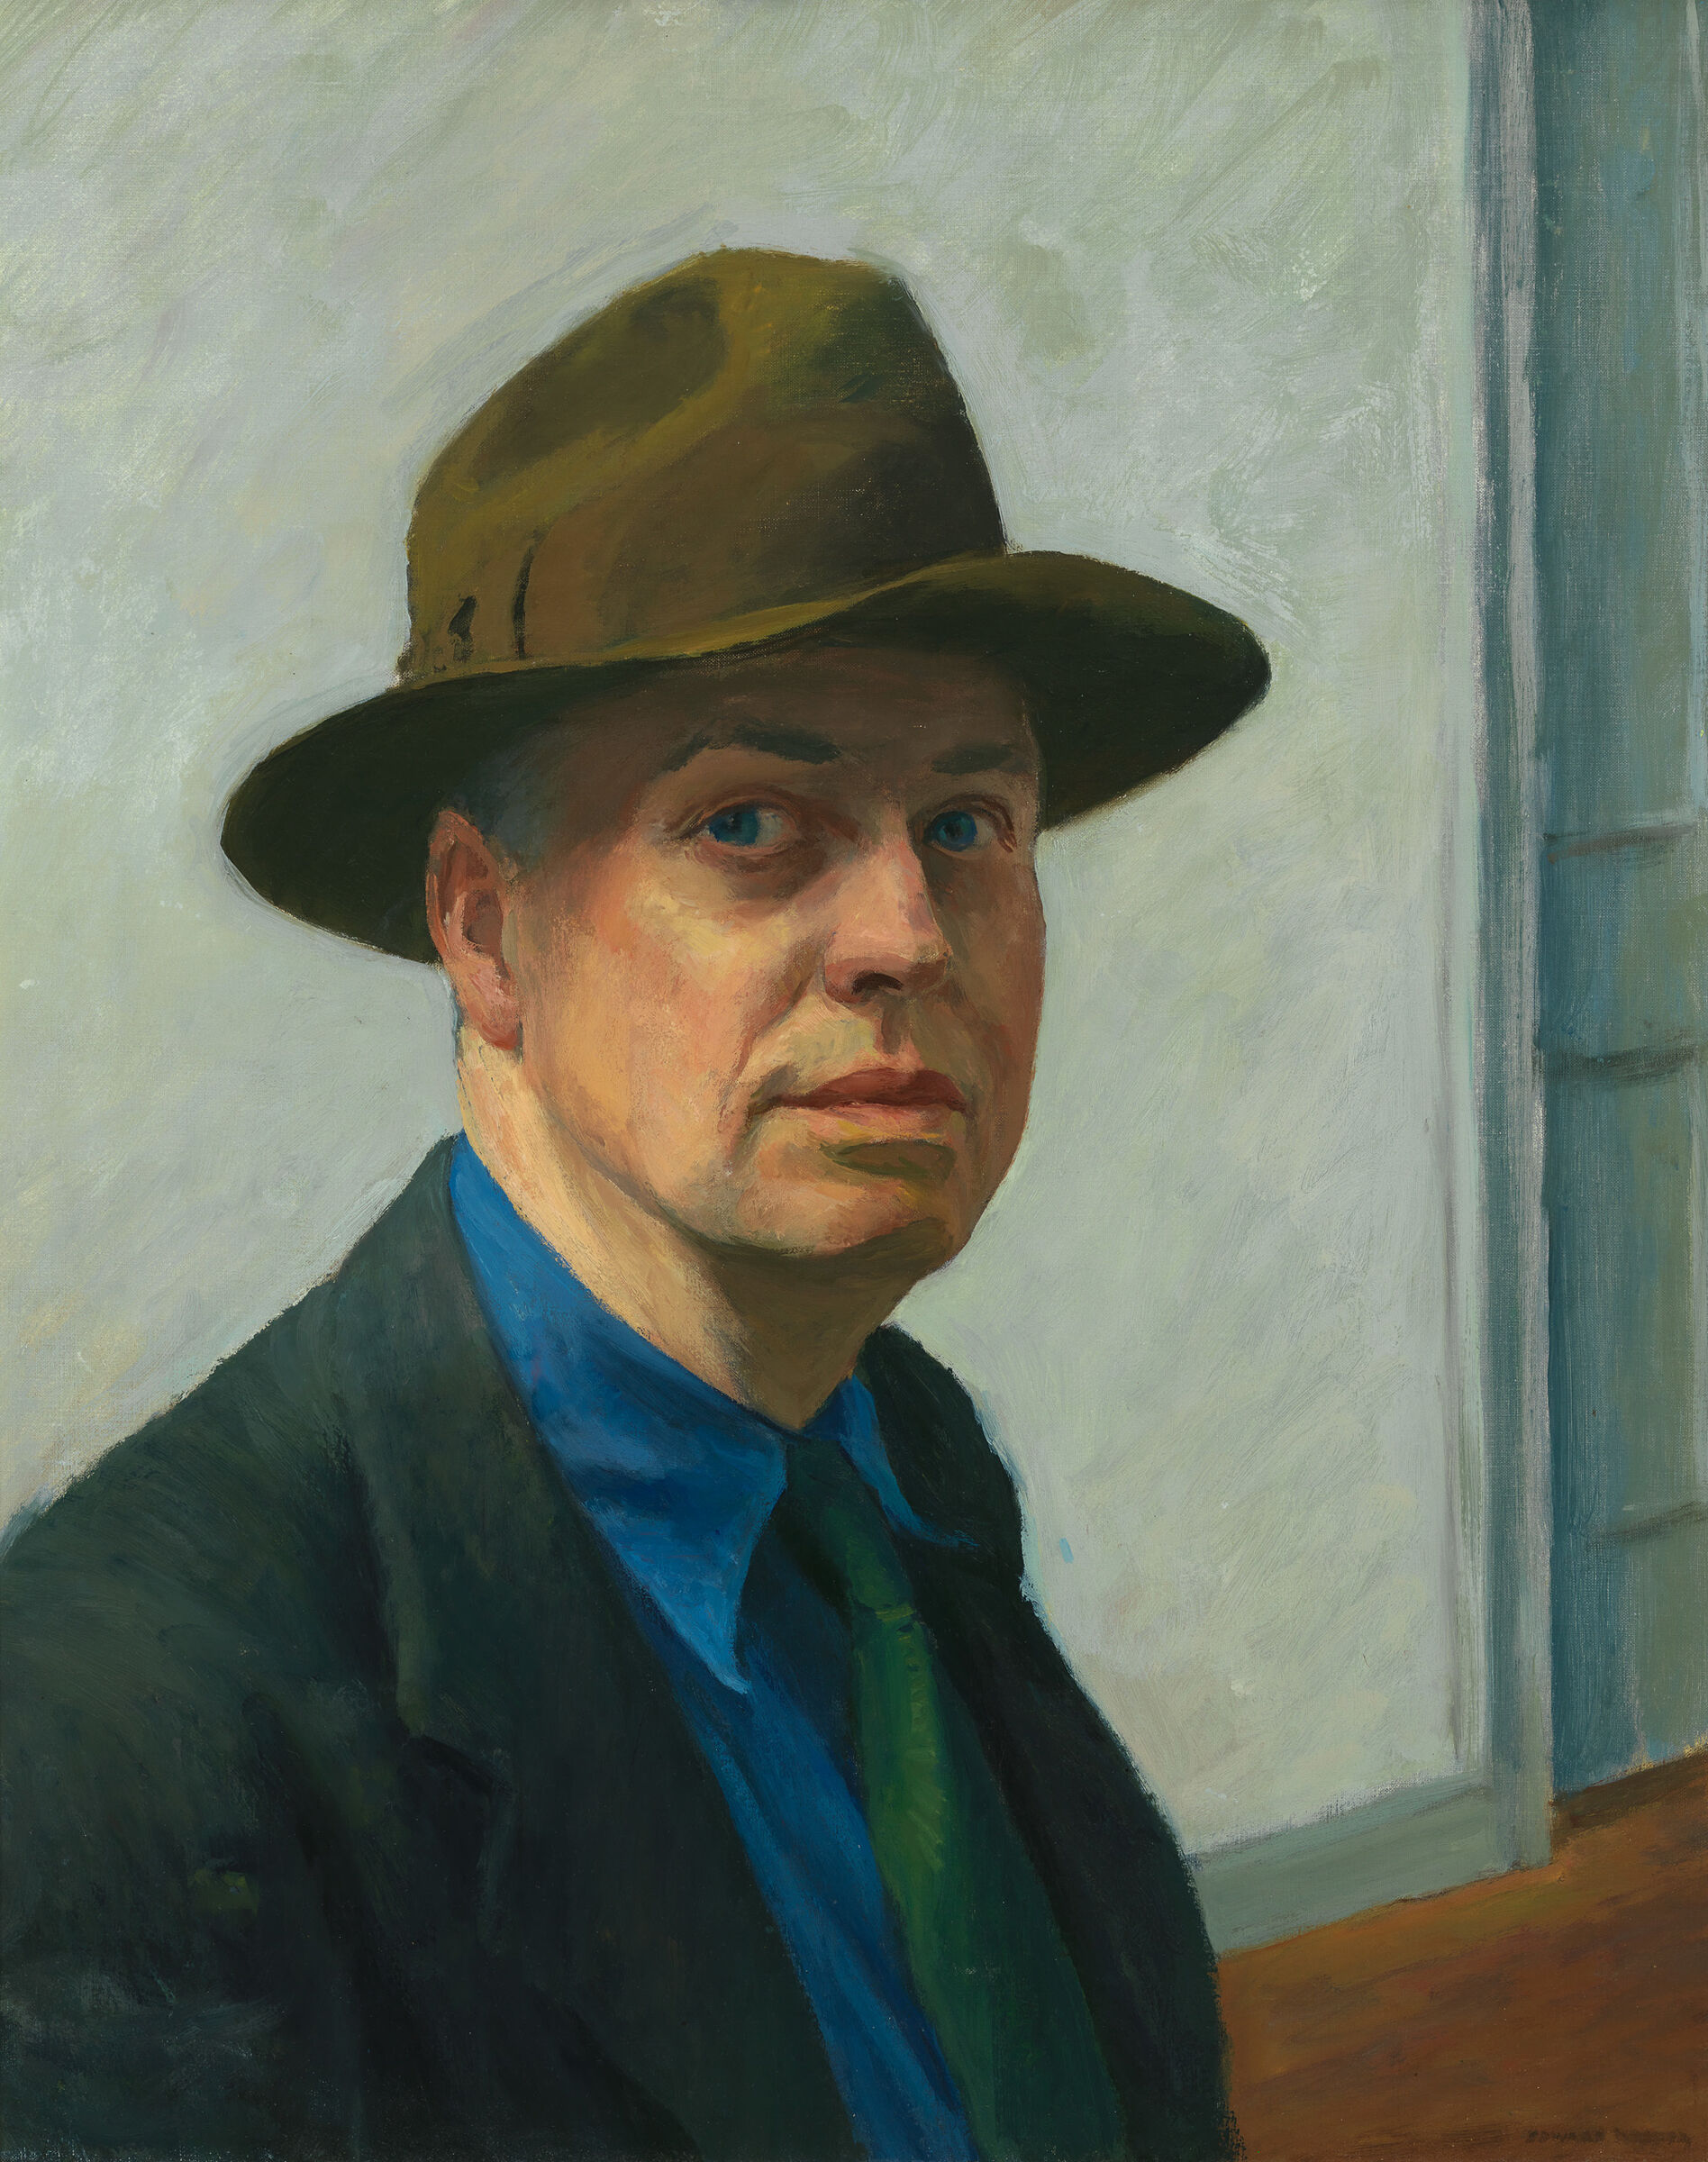 A painting of Edward Hopper, wearing a brown hat, against a pale background.